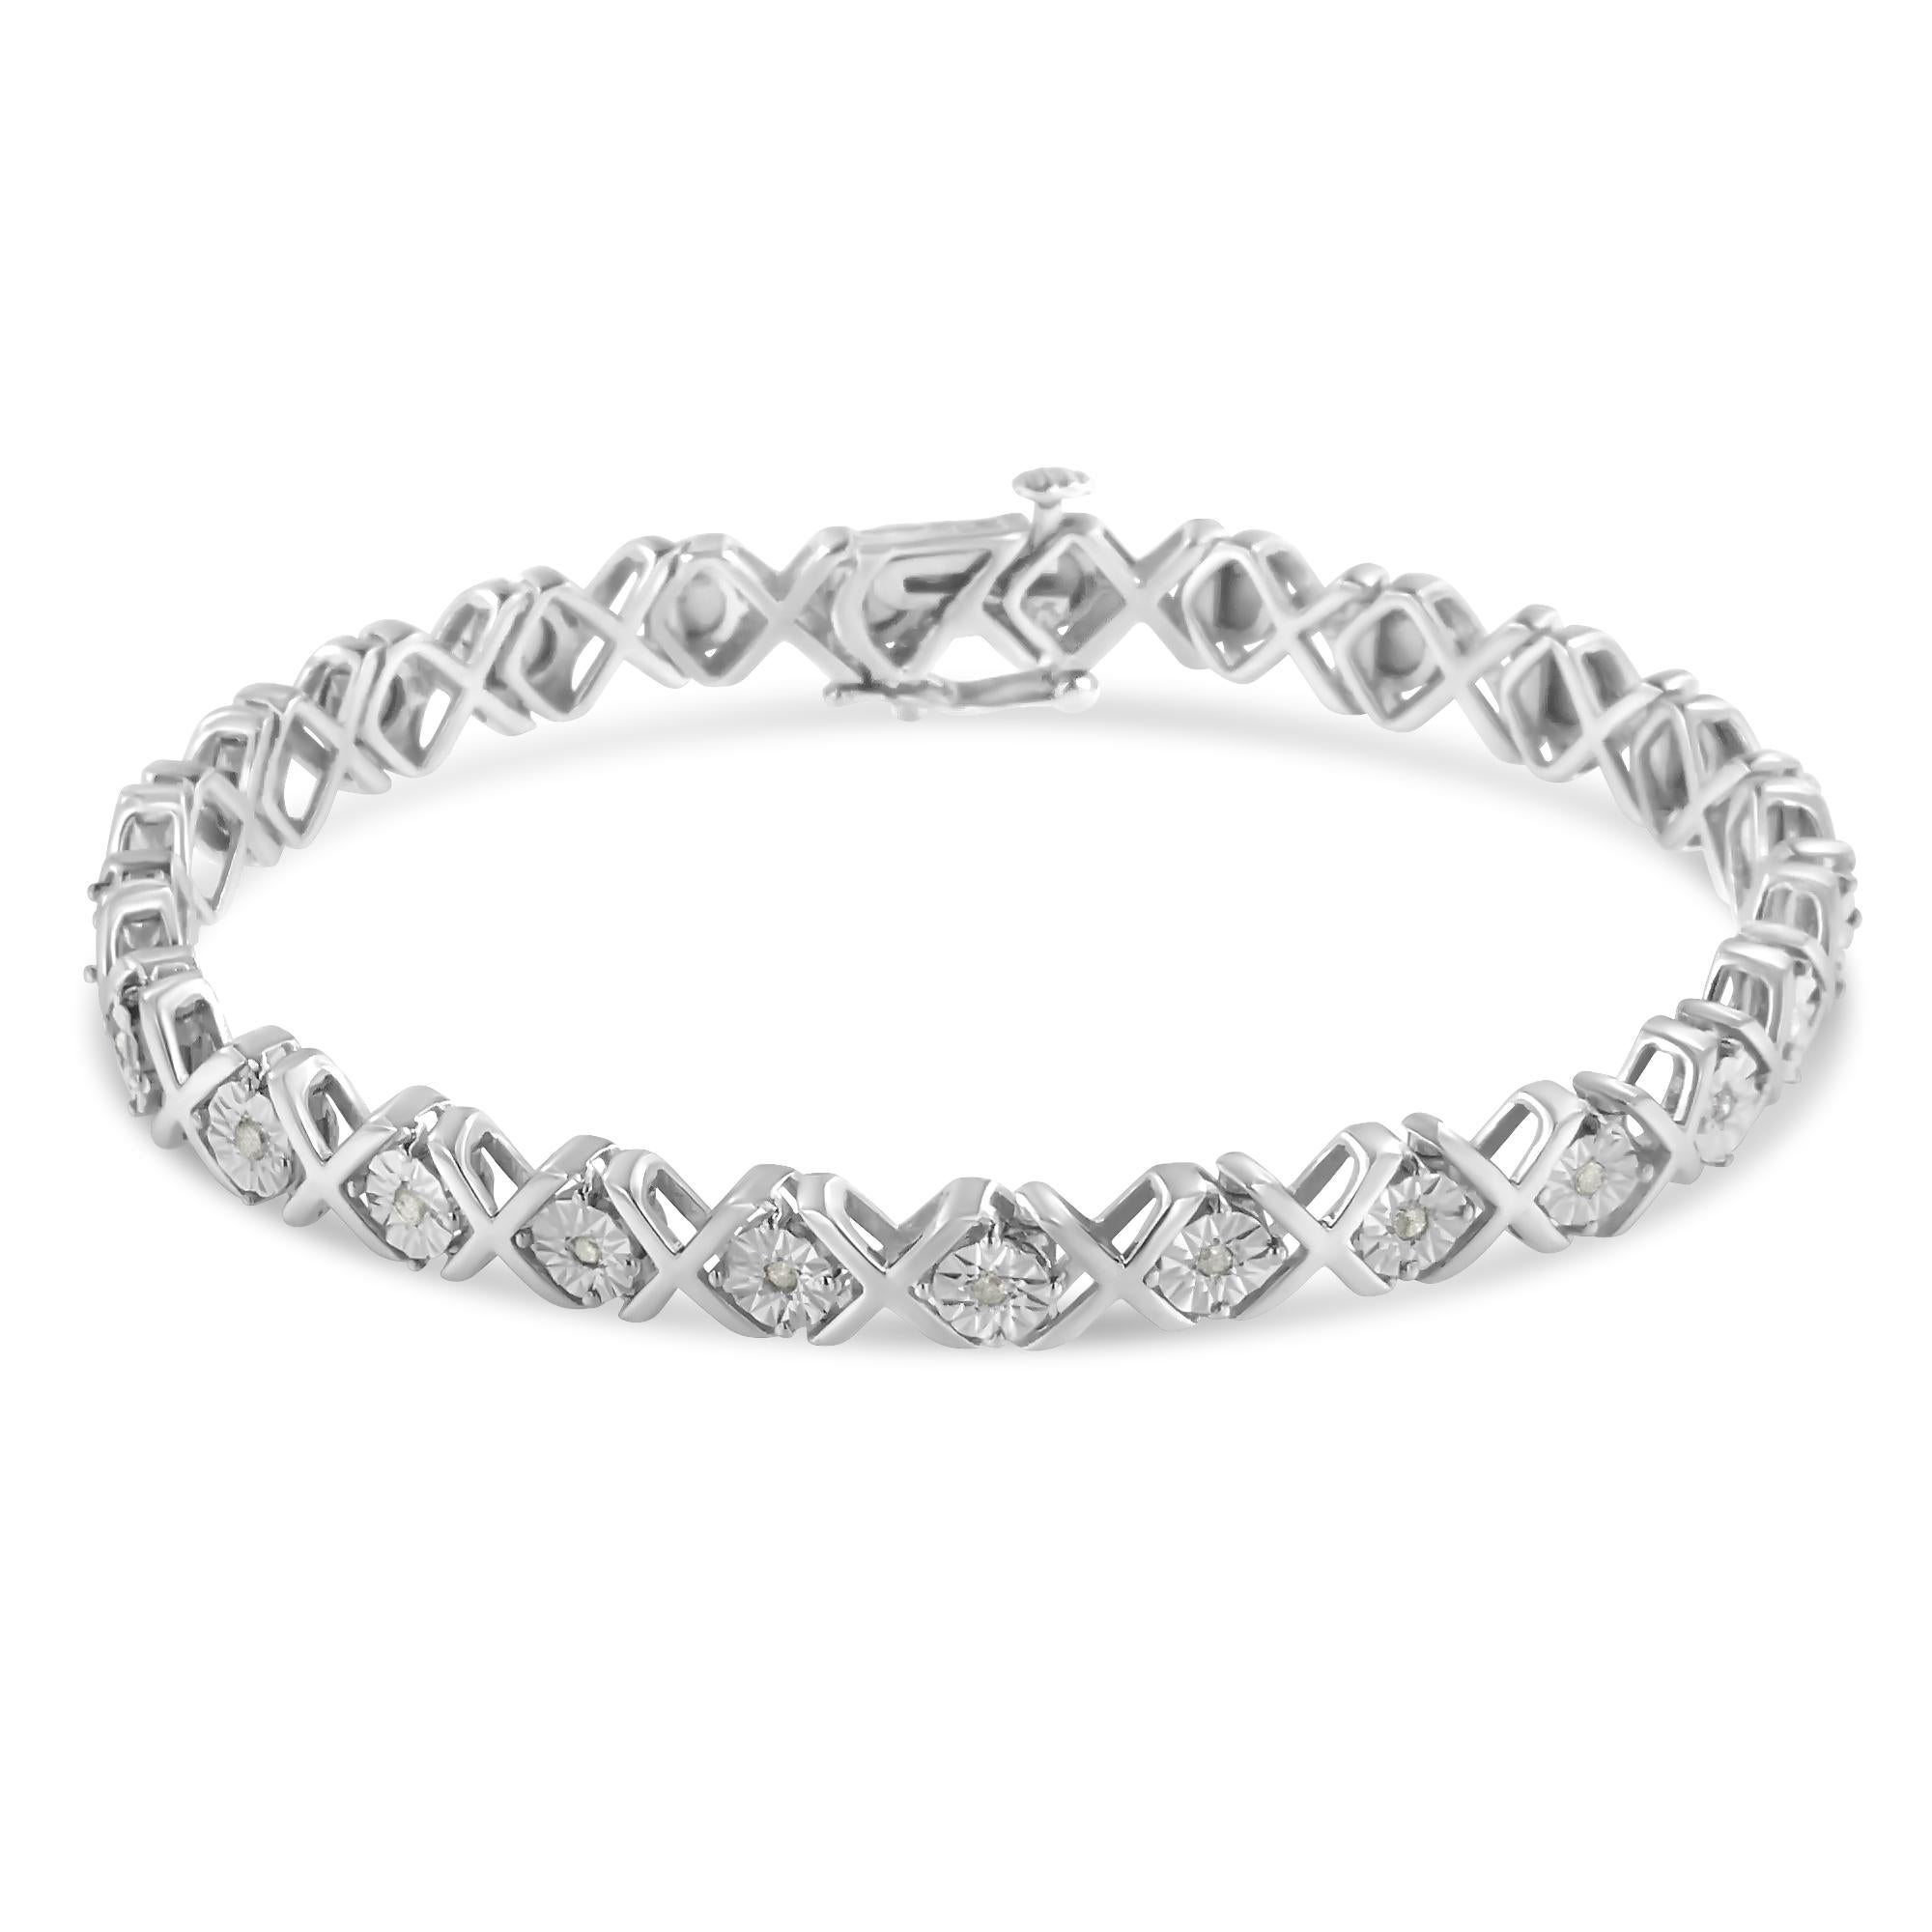 A gorgeous sterling silver diamond accent tennis bracelet, perfect for your jewelry collection. This stunning piece is designed with a pattern of round-cut diamonds embellished in a miracle setting, separated by sterling silver 